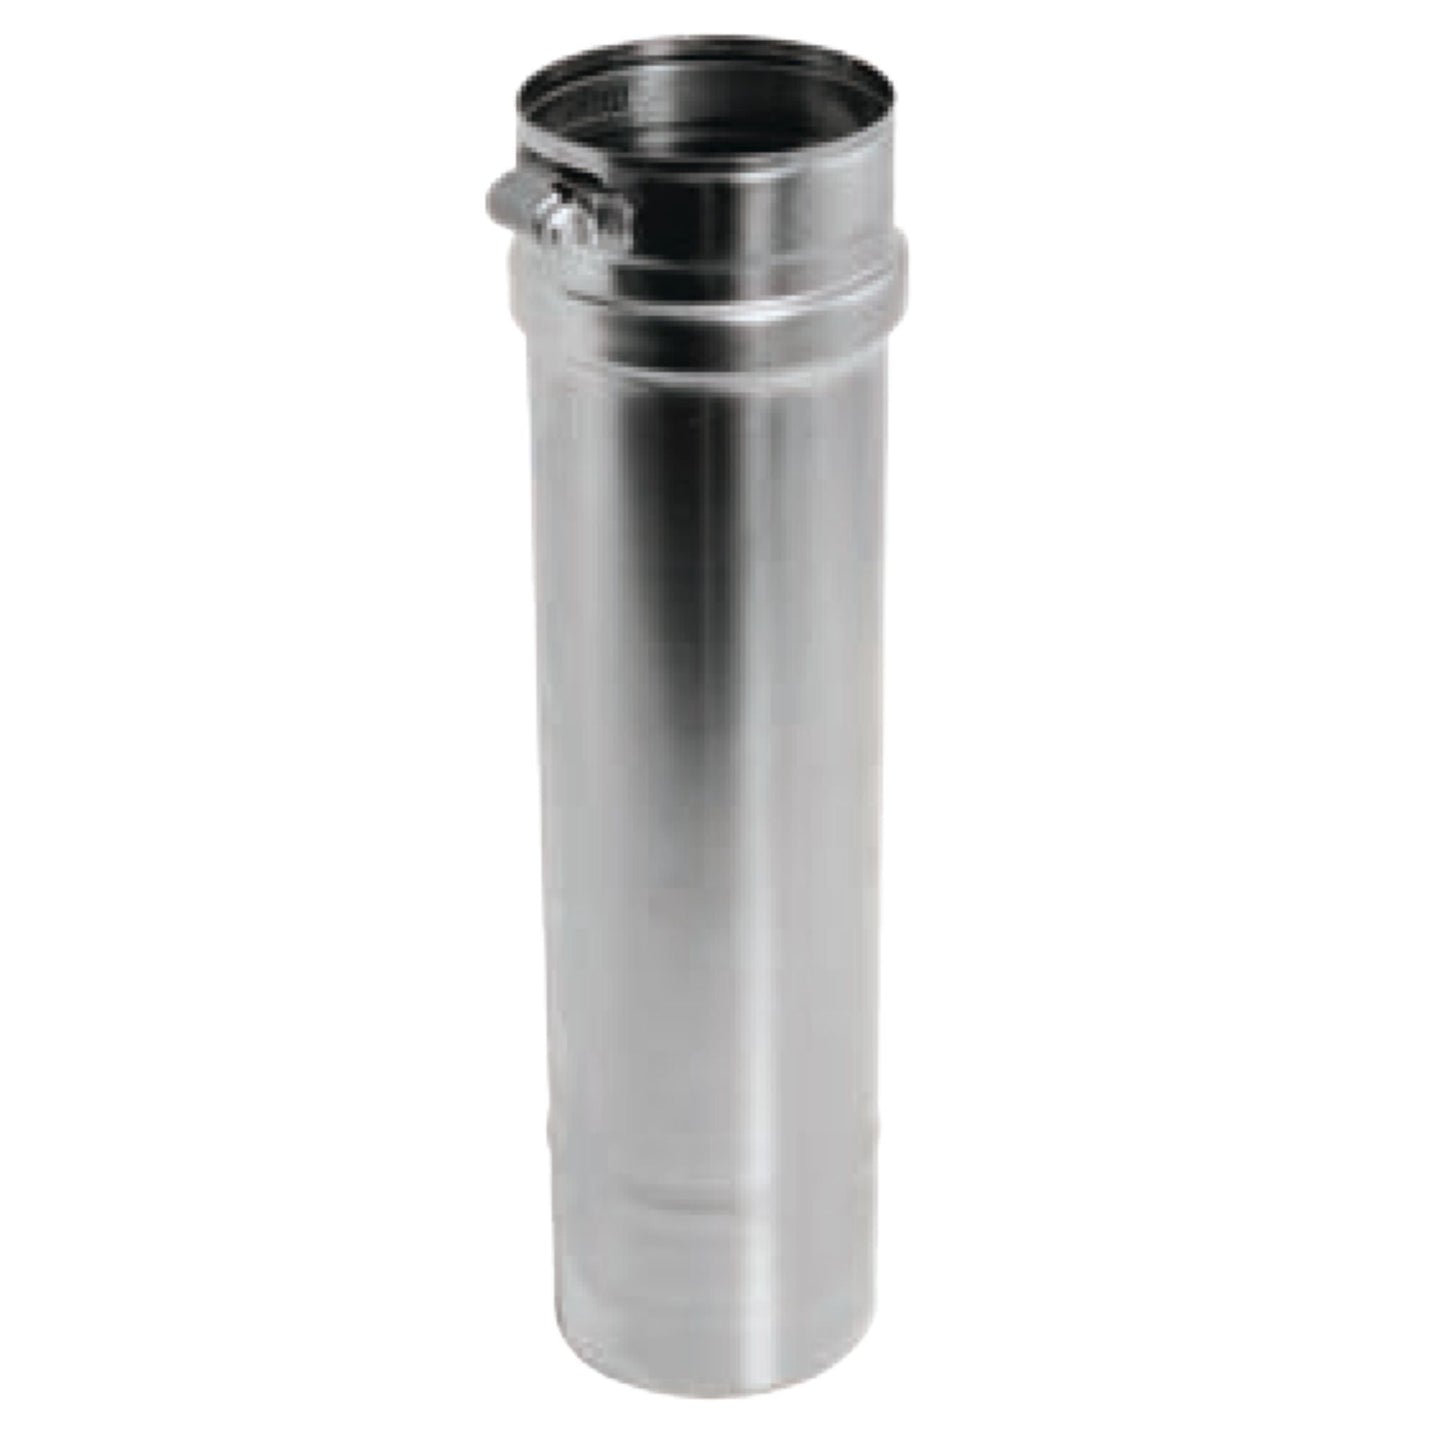 DuraVent FasNSeal 7" x 36" 29-4C Stainless Steel Vent Length